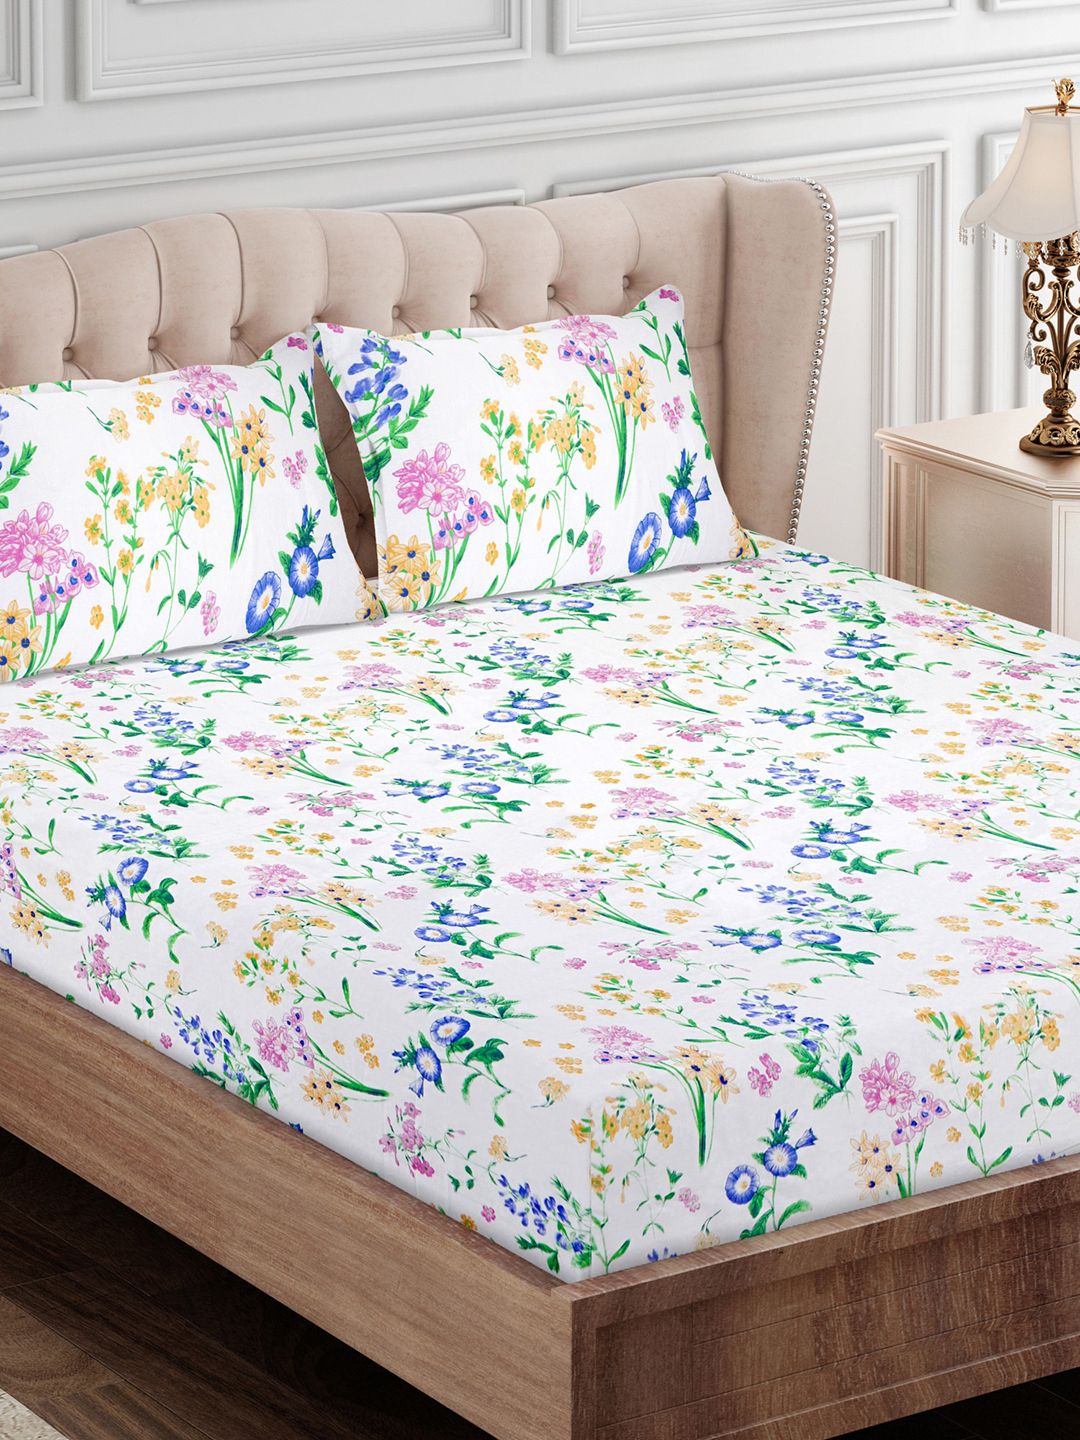 SEJ by Nisha Gupta Purple & Off White Floral 180 TC King Bedsheet with 2 Pillow Covers Price in India